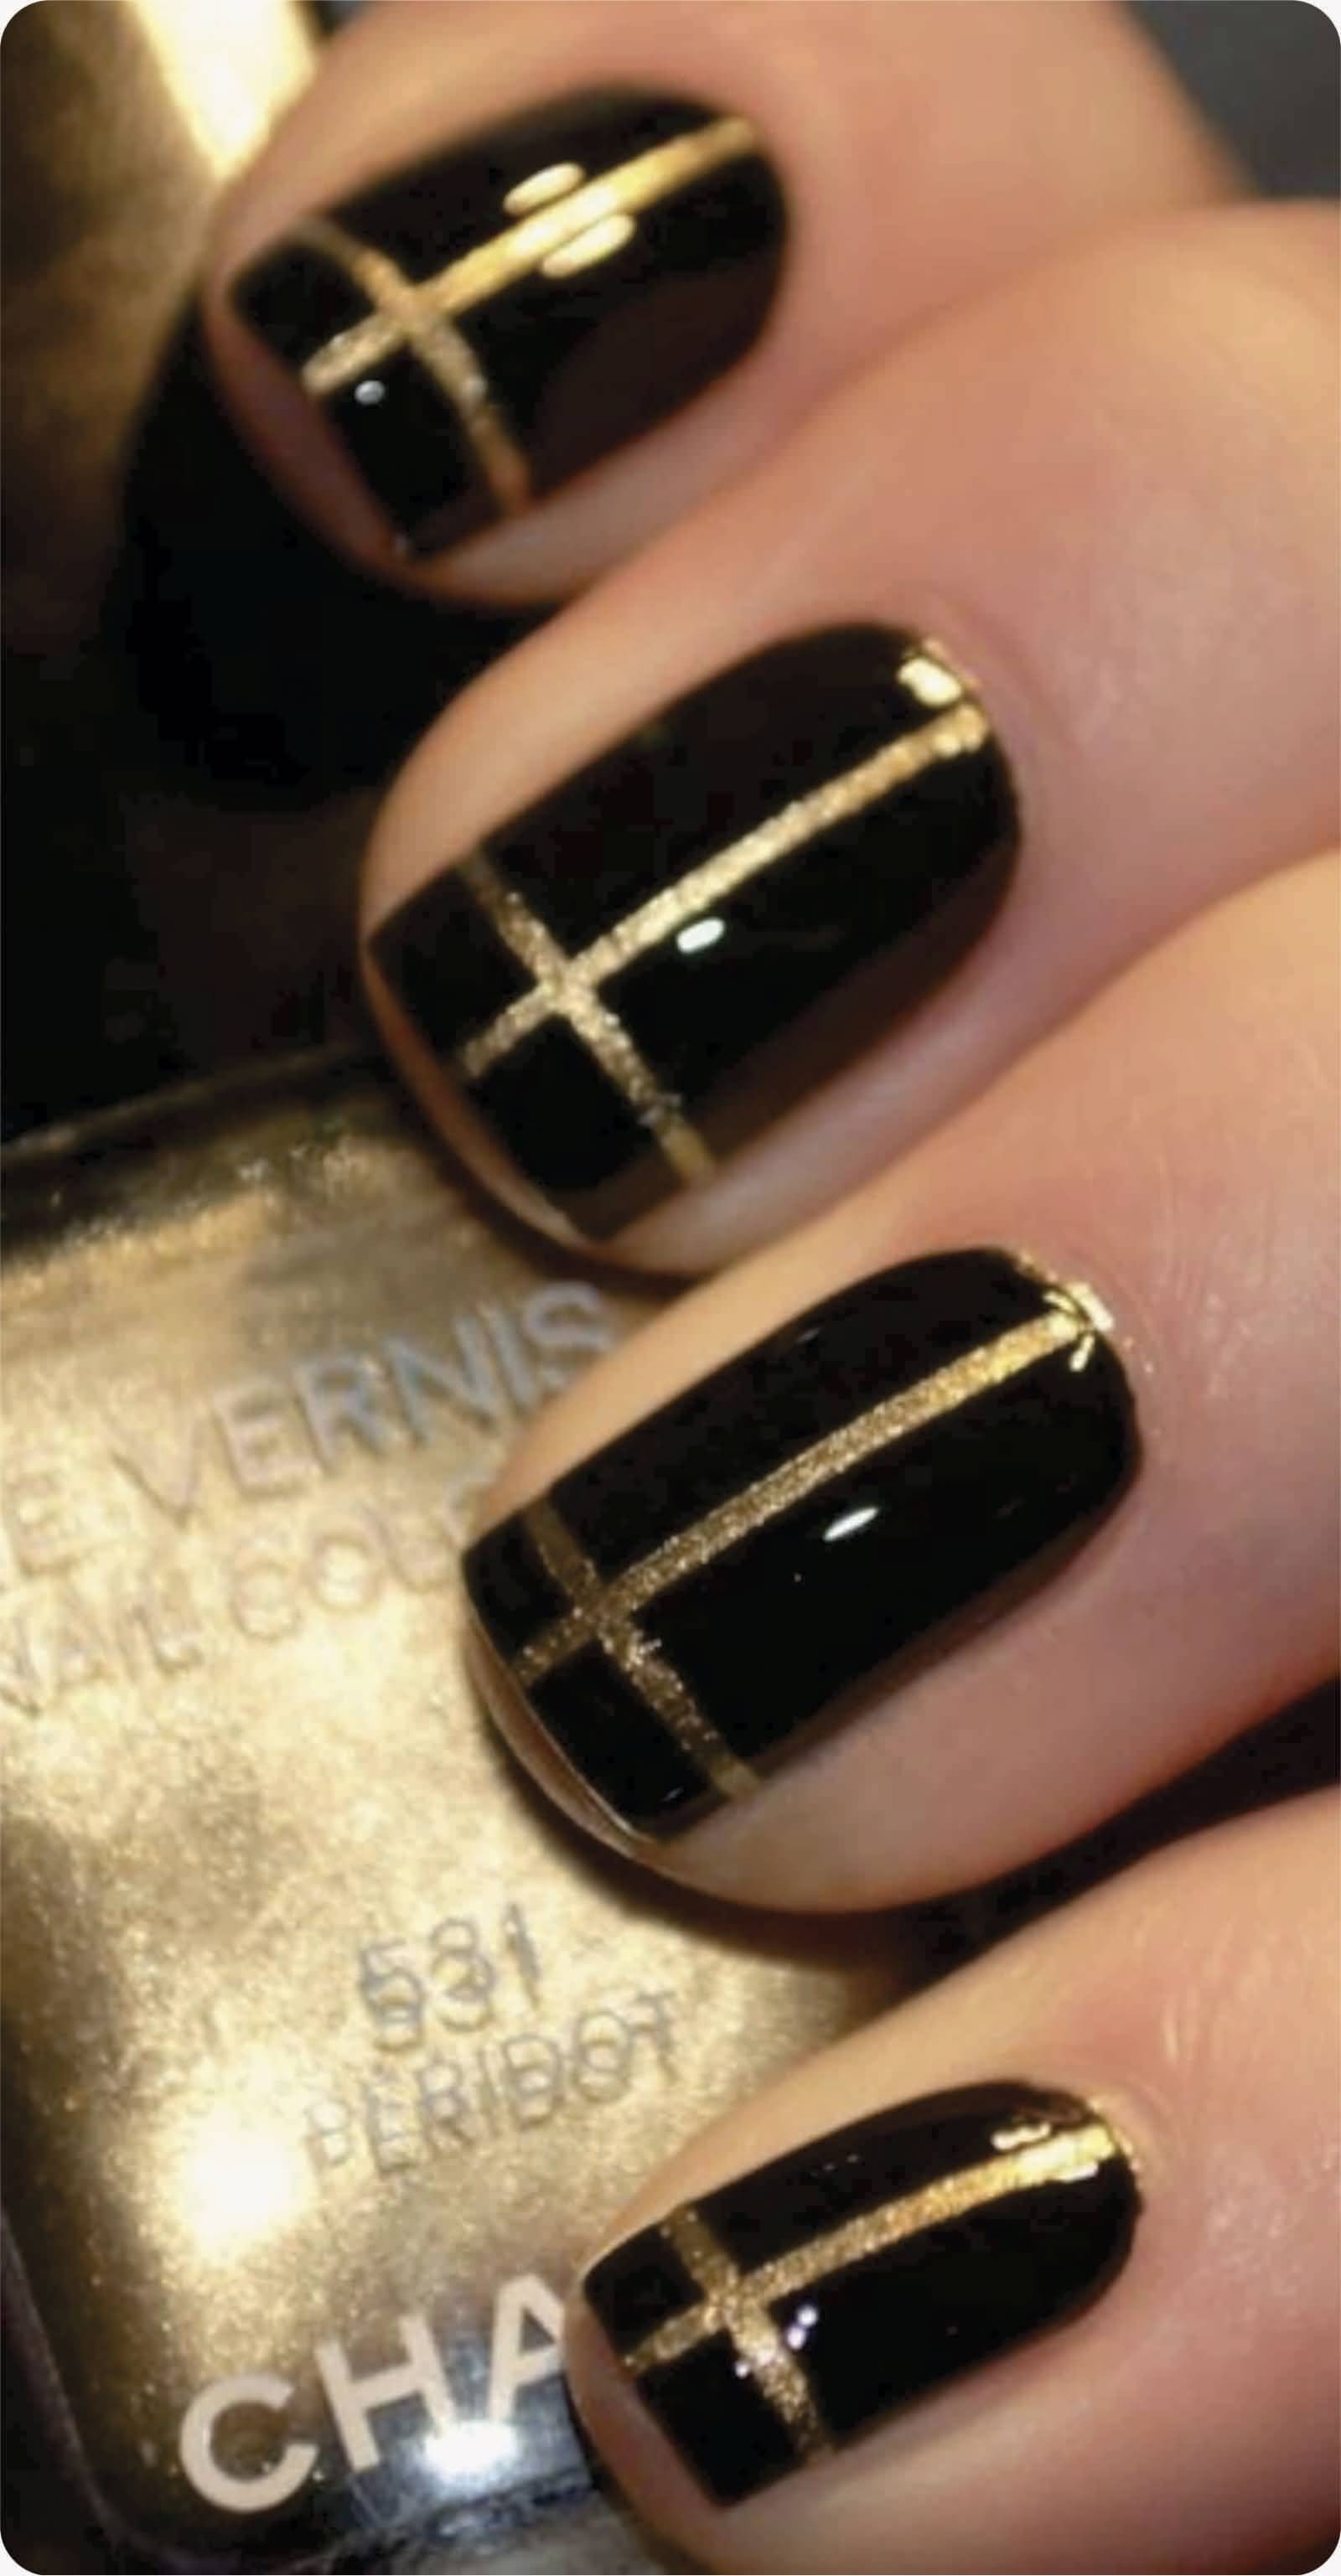 Glossy Black Nails With Gold Stripes Design Nail Art